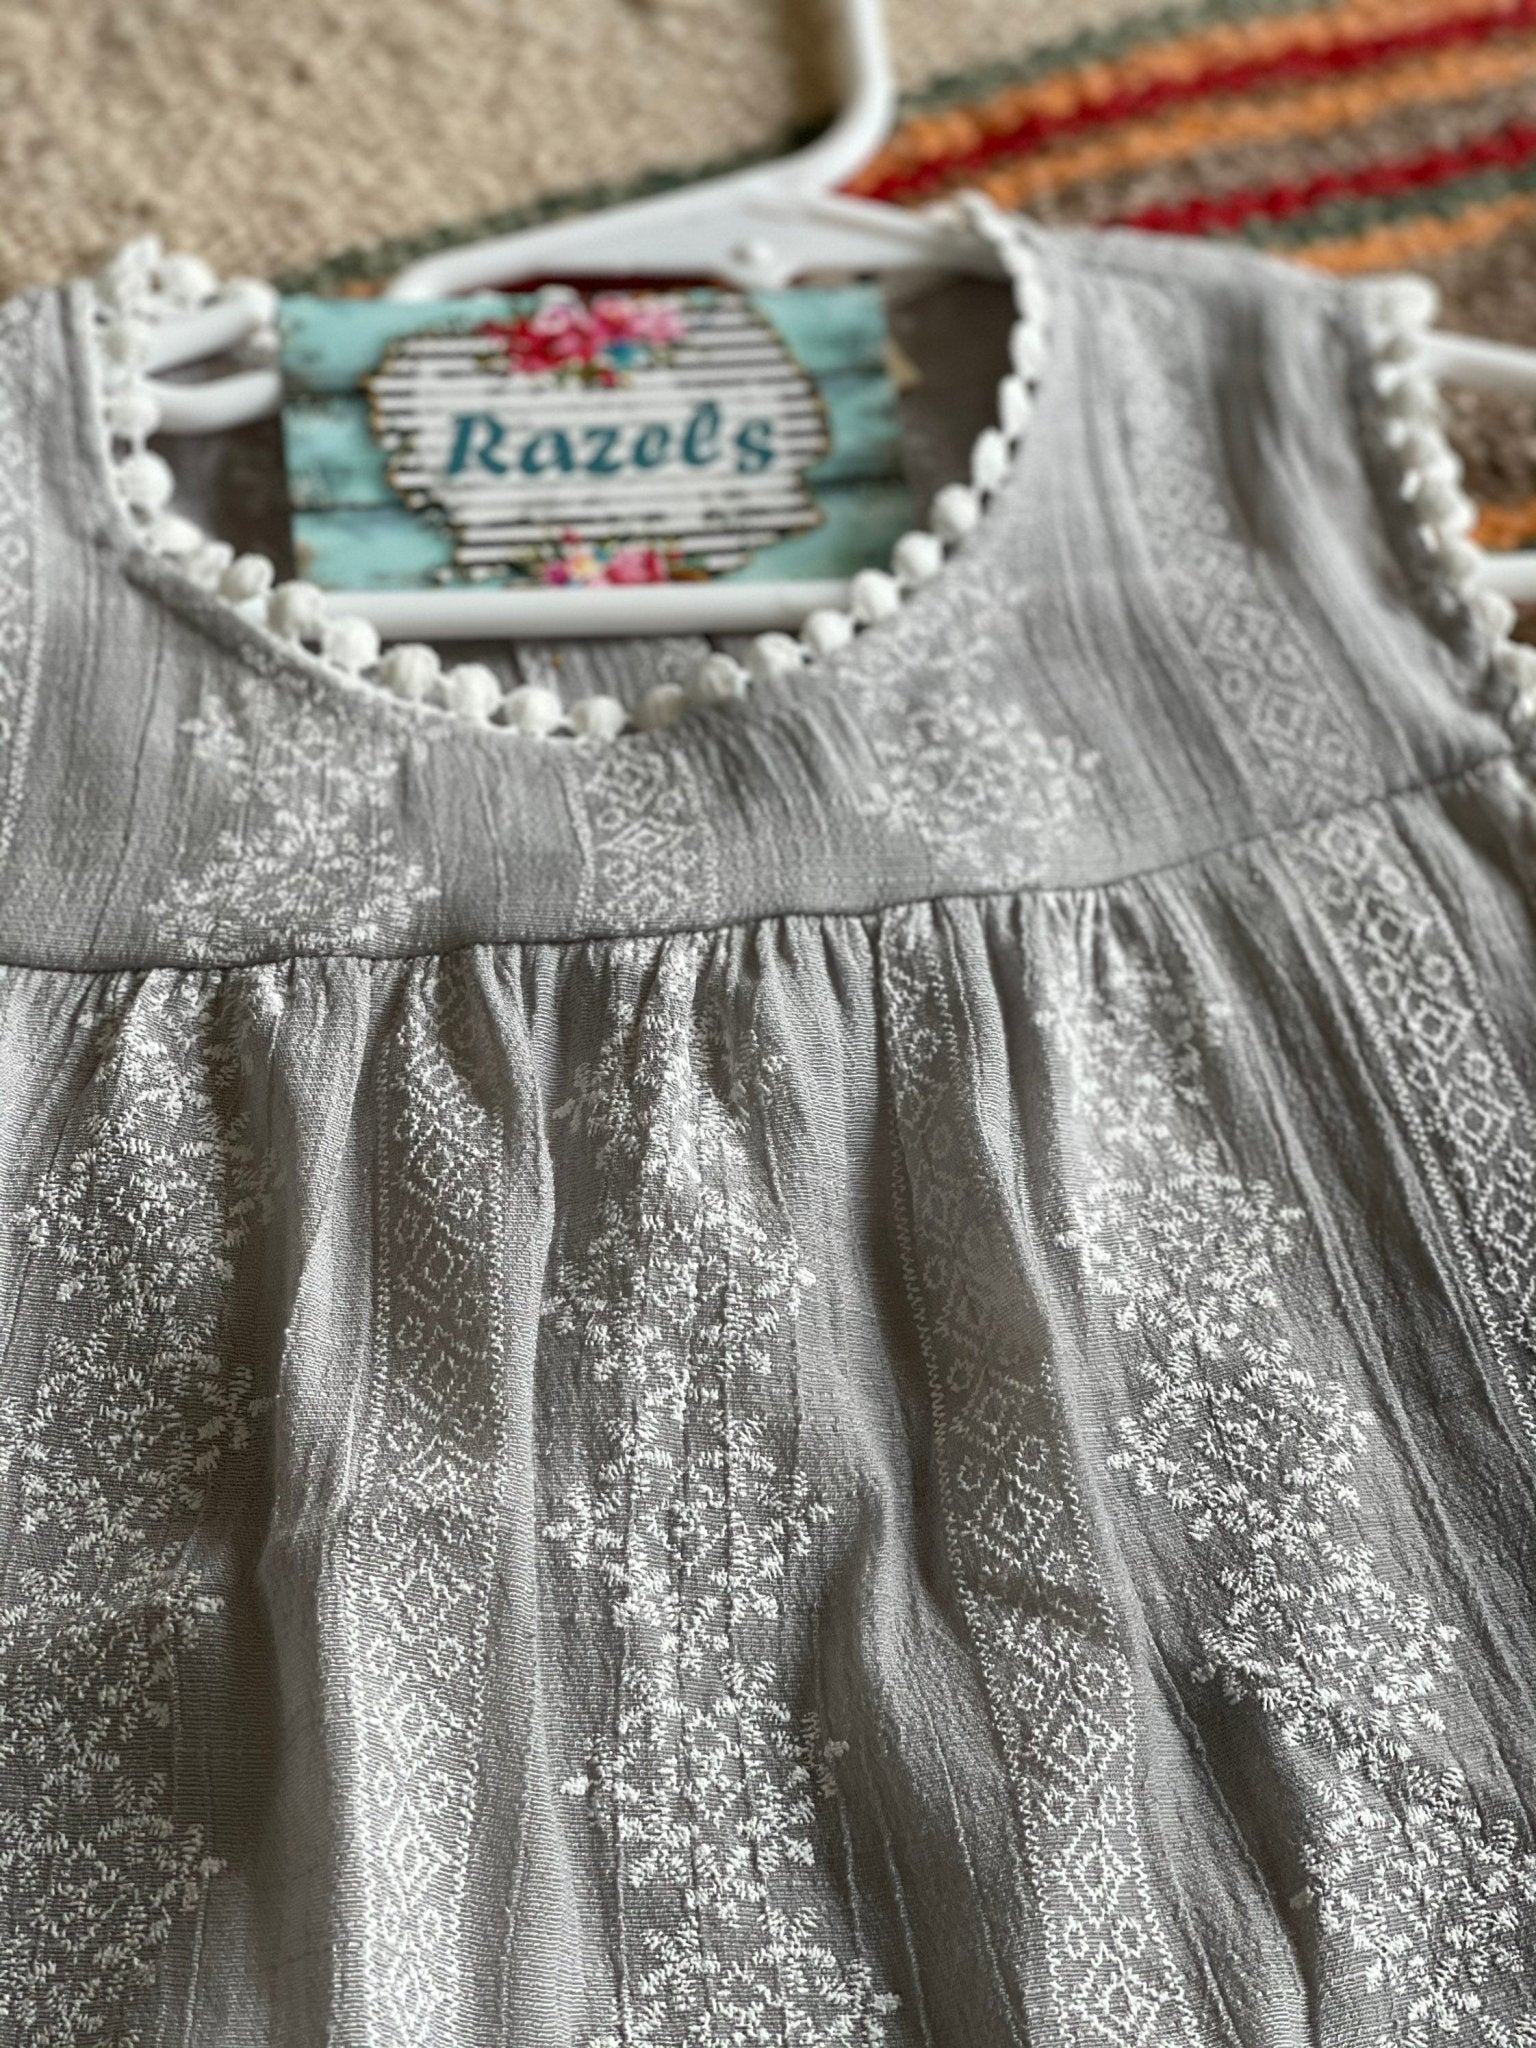 Girls Summer Embroidered Tank Tunic | Pretty Spring Summer Tank | Lace Layering Top - Razels